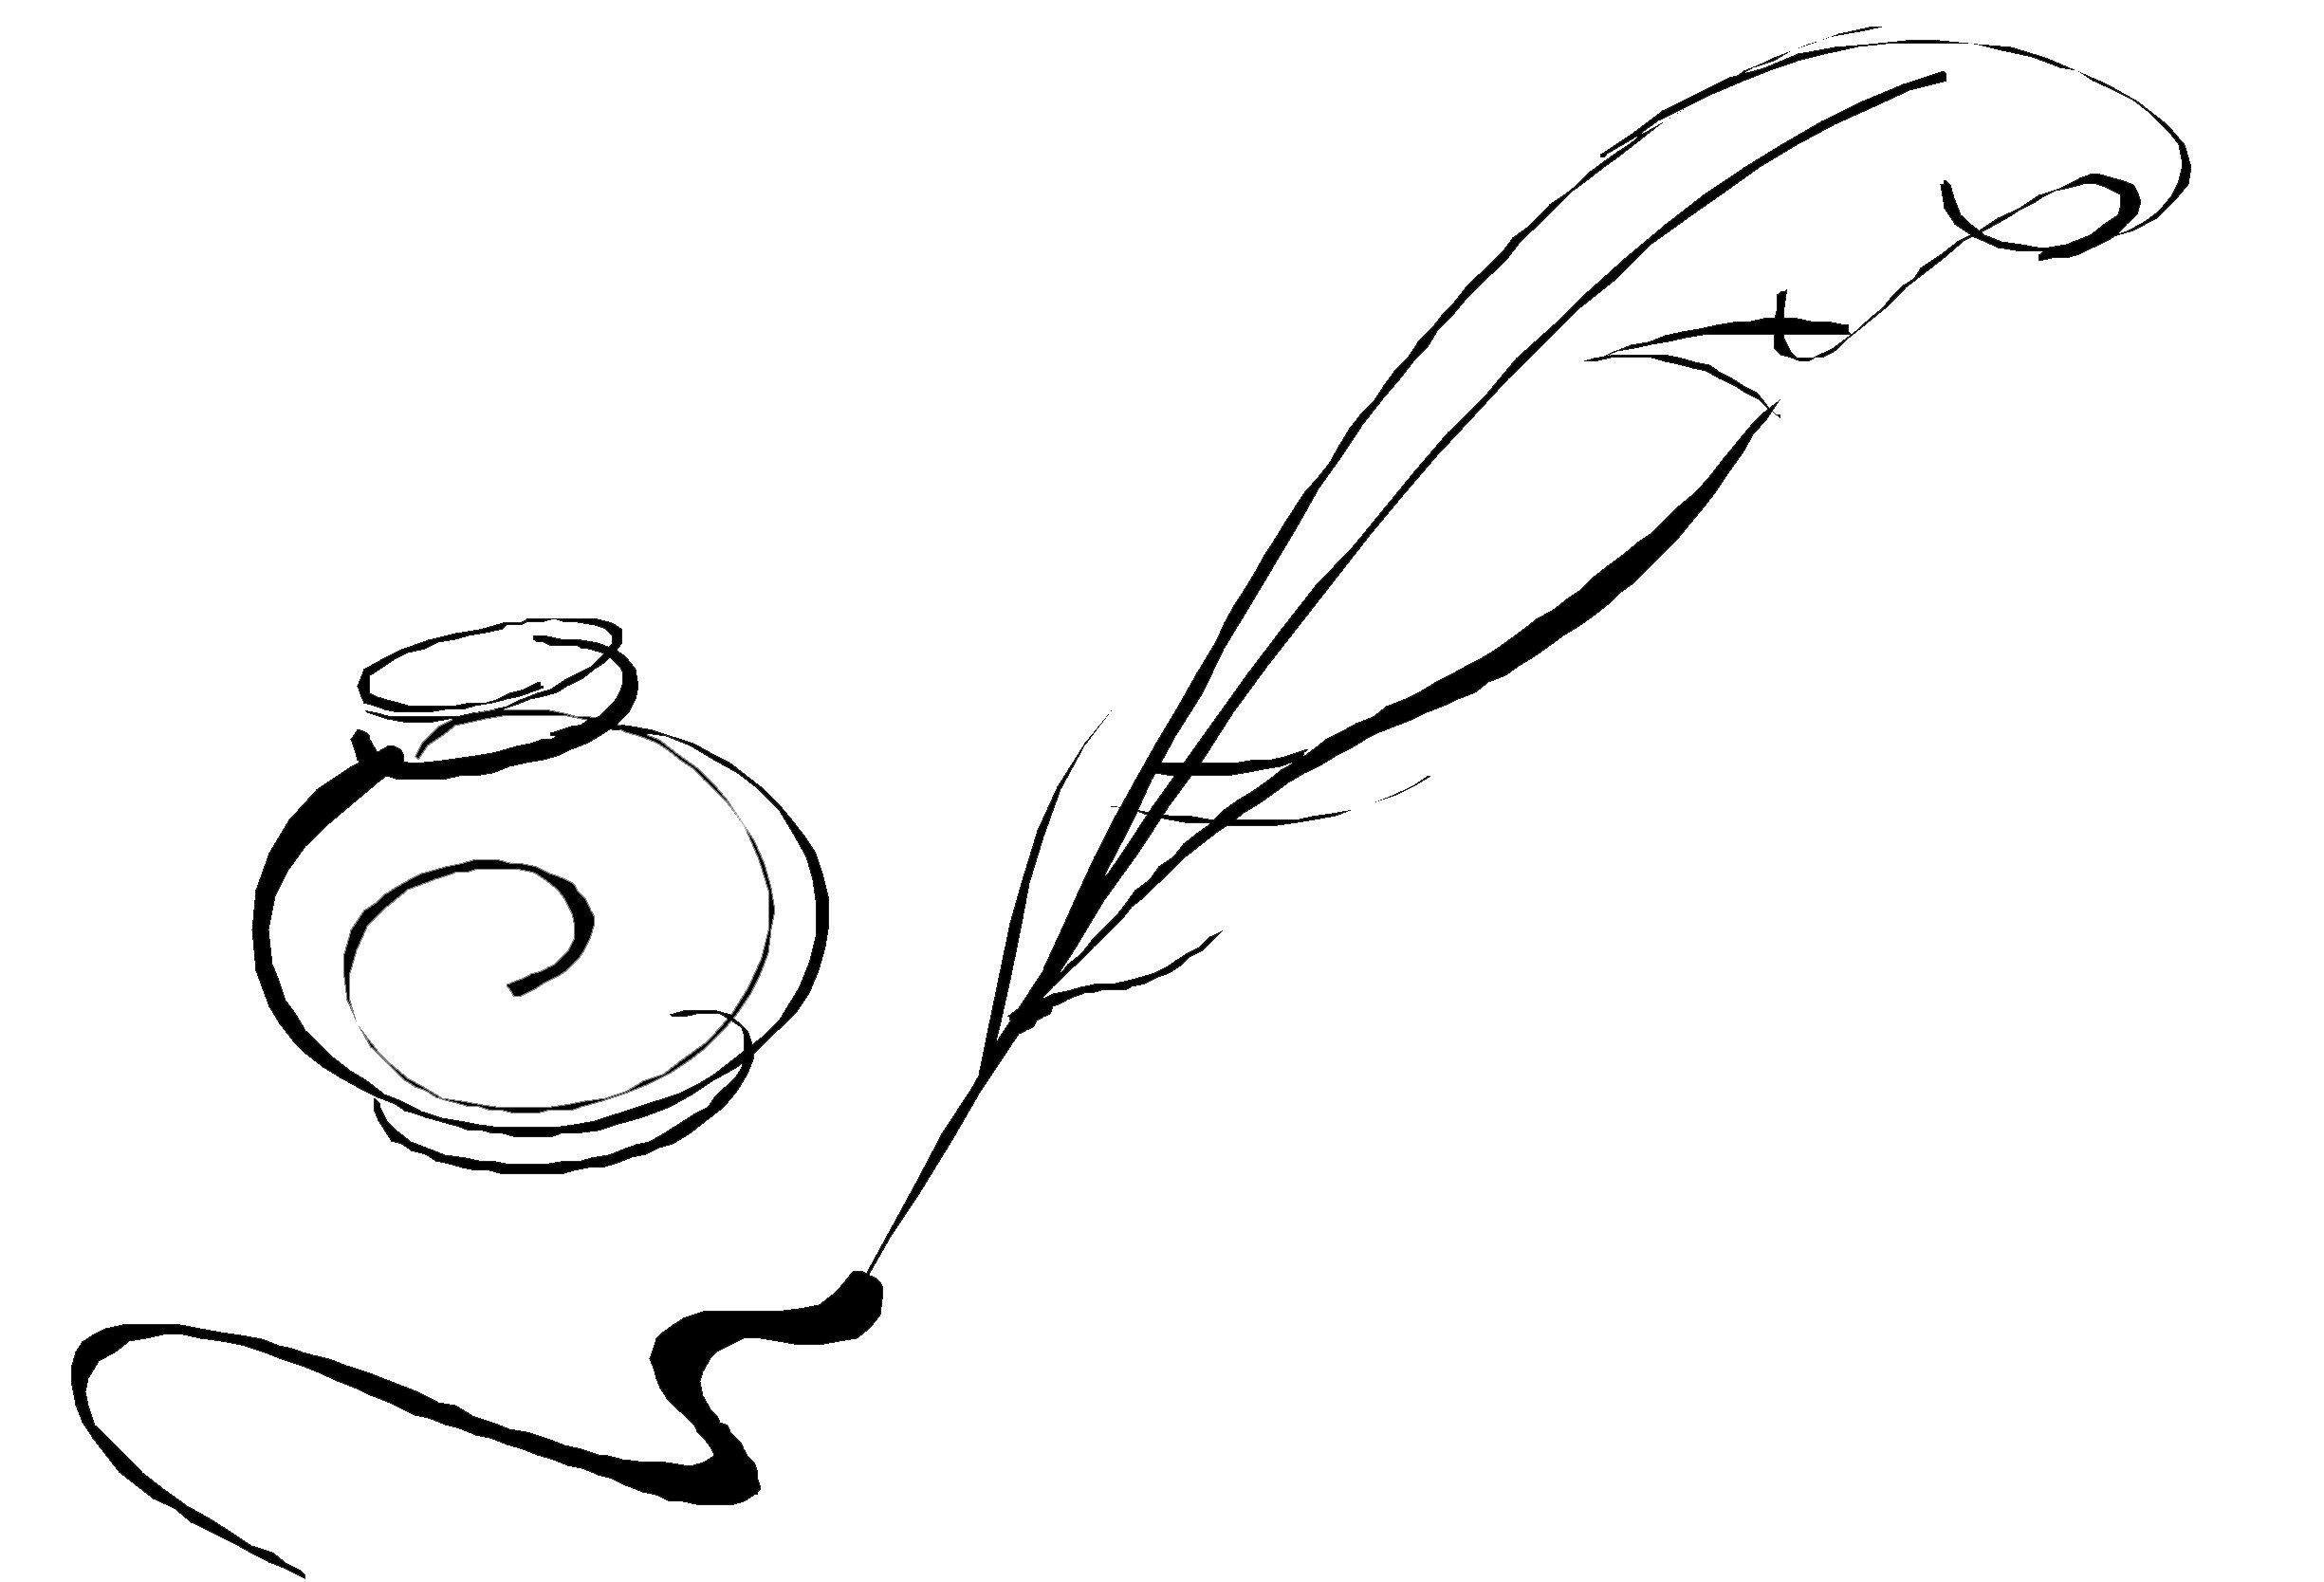 Quill Scroll Logo - Free Quill Pen Pictures, Download Free Clip Art, Free Clip Art on ...